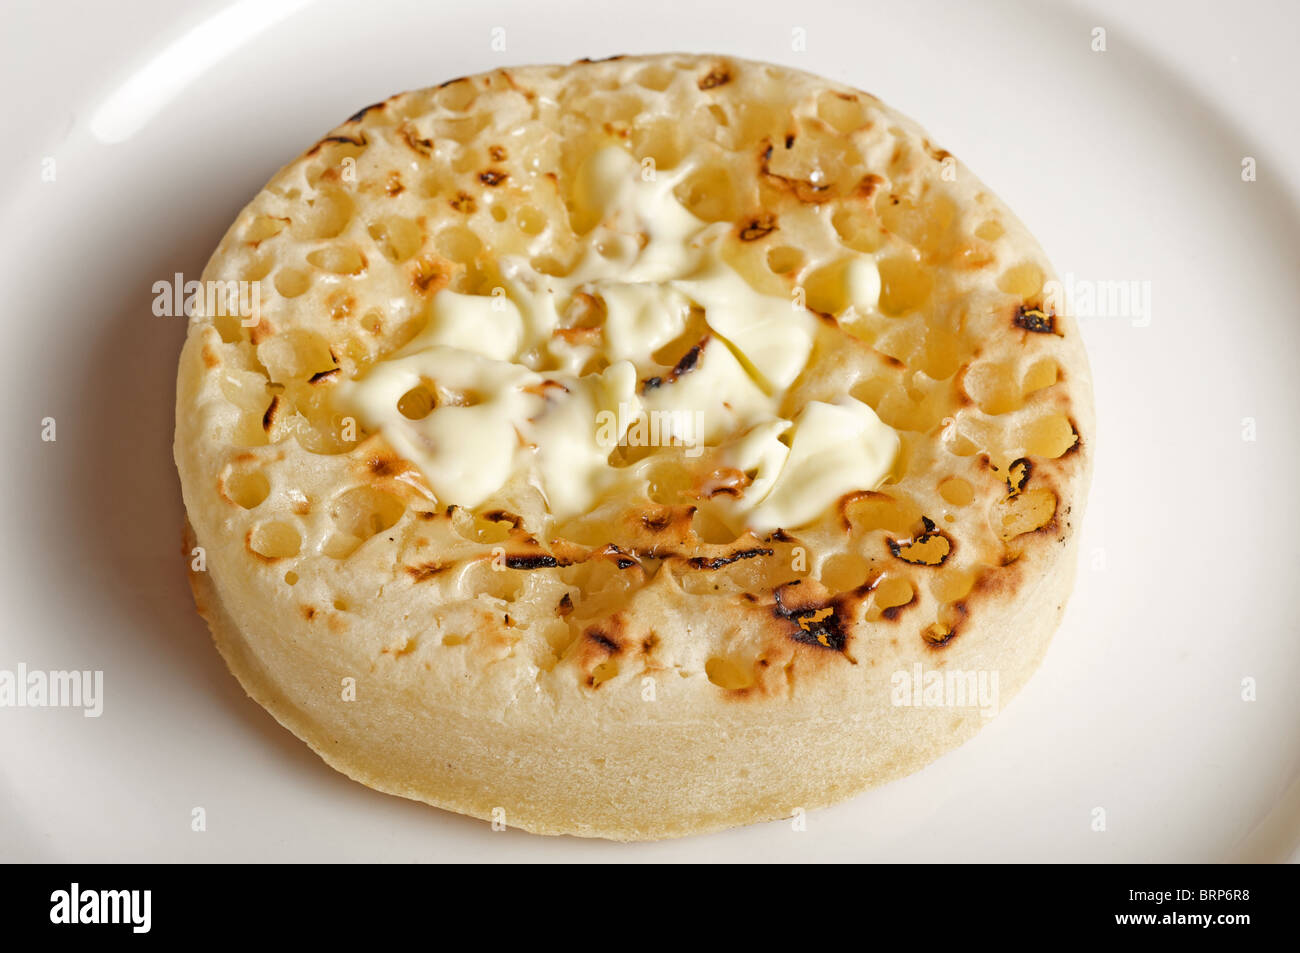 Toasted buttered crumpet Stock Photo